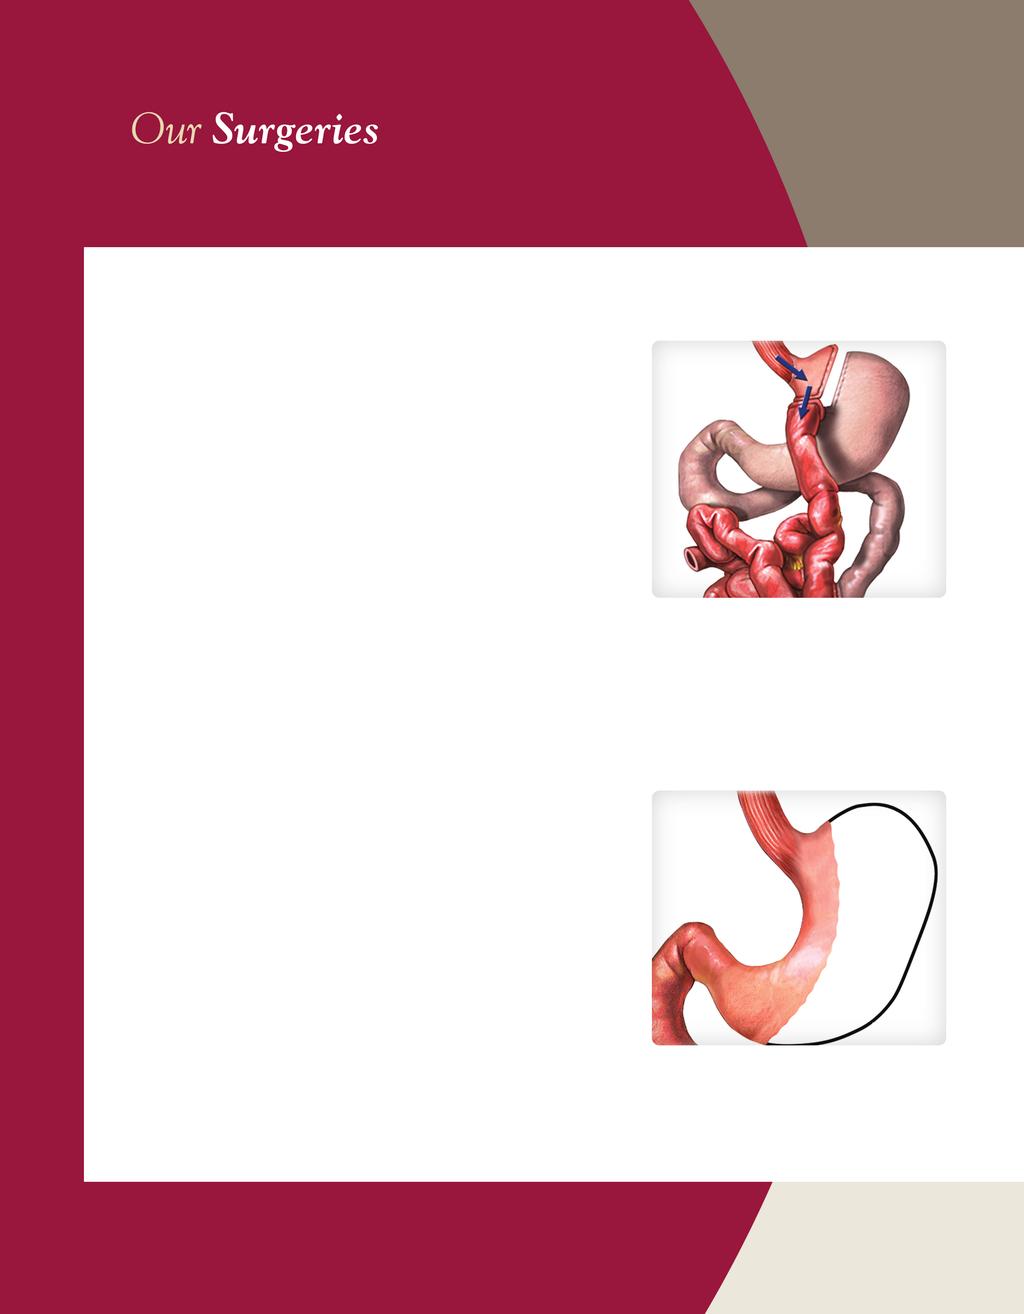 Laparoscopic Gastric Bypass Laparoscopic gastric bypass is the most frequently performed weight loss surgery in the United States.